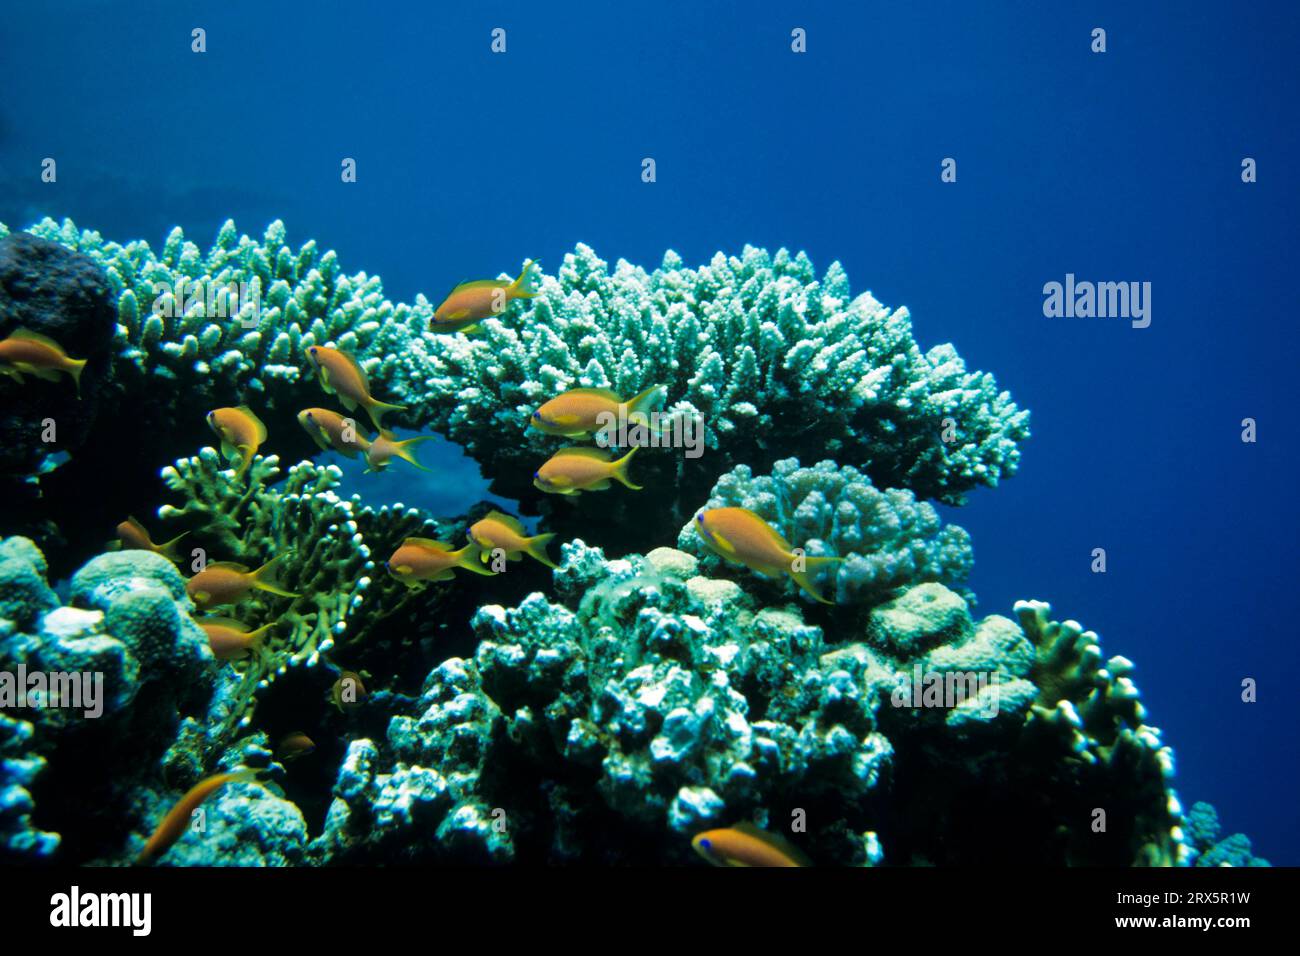 Red Sea Flagfish on the Reef, Red Sea, Egypt Stock Photo